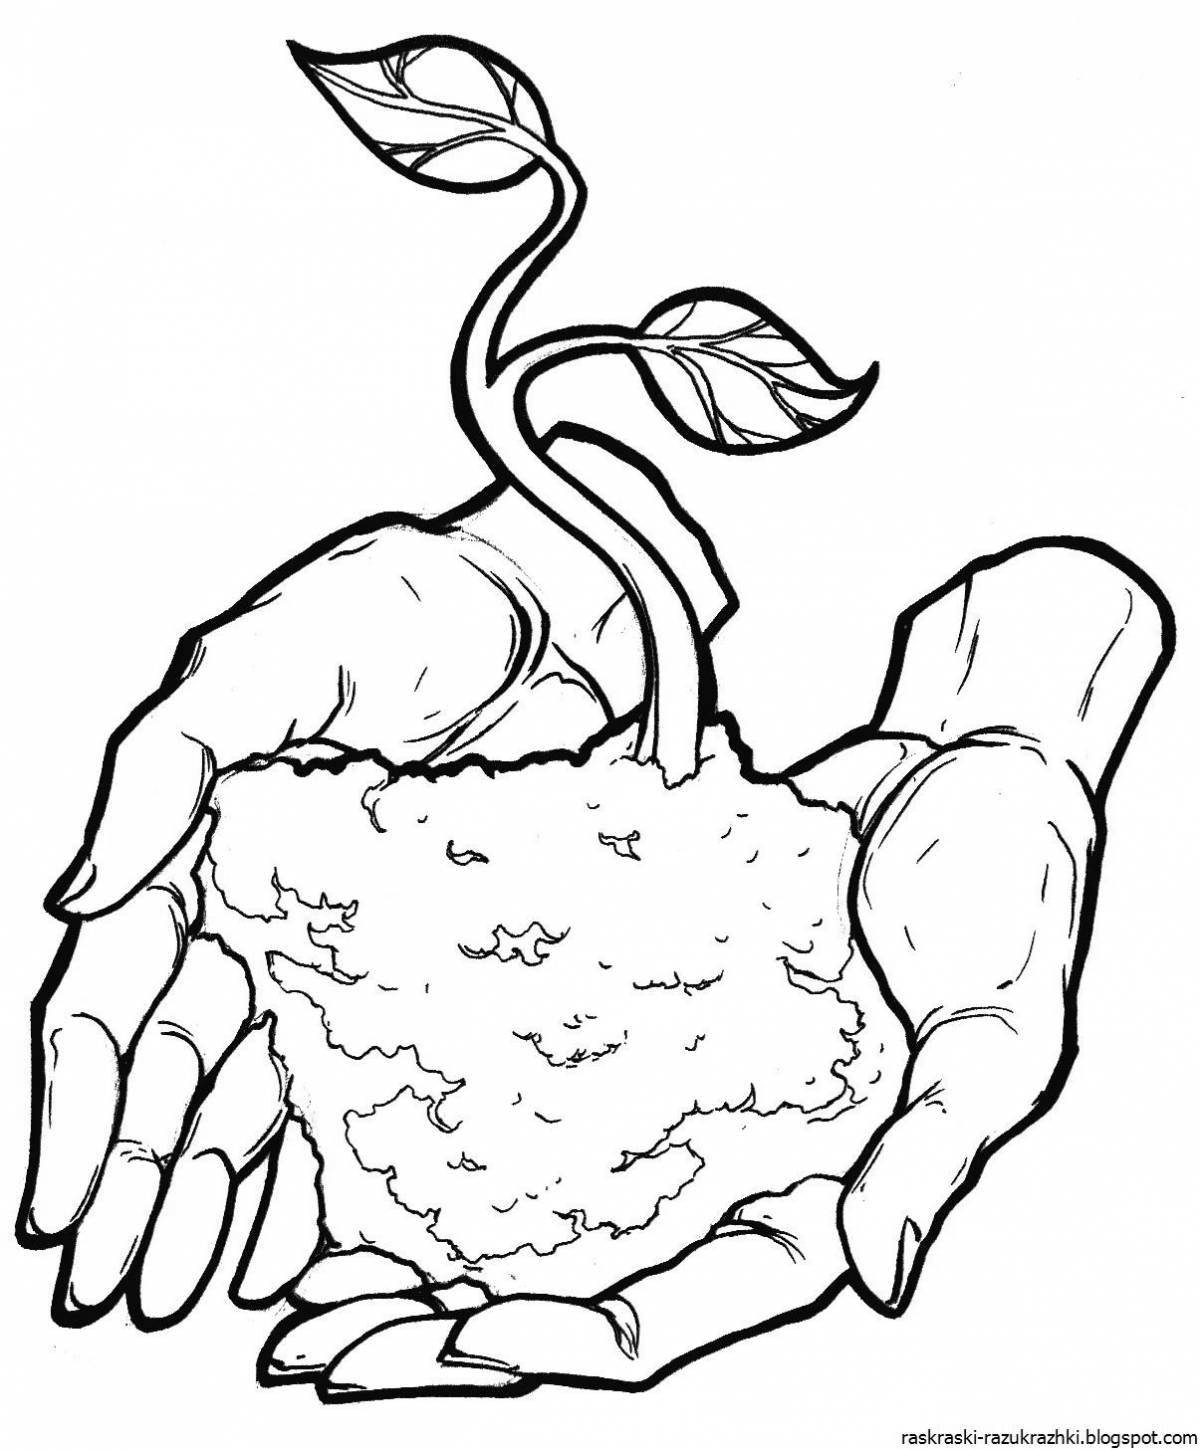 Adorable save the nature coloring page